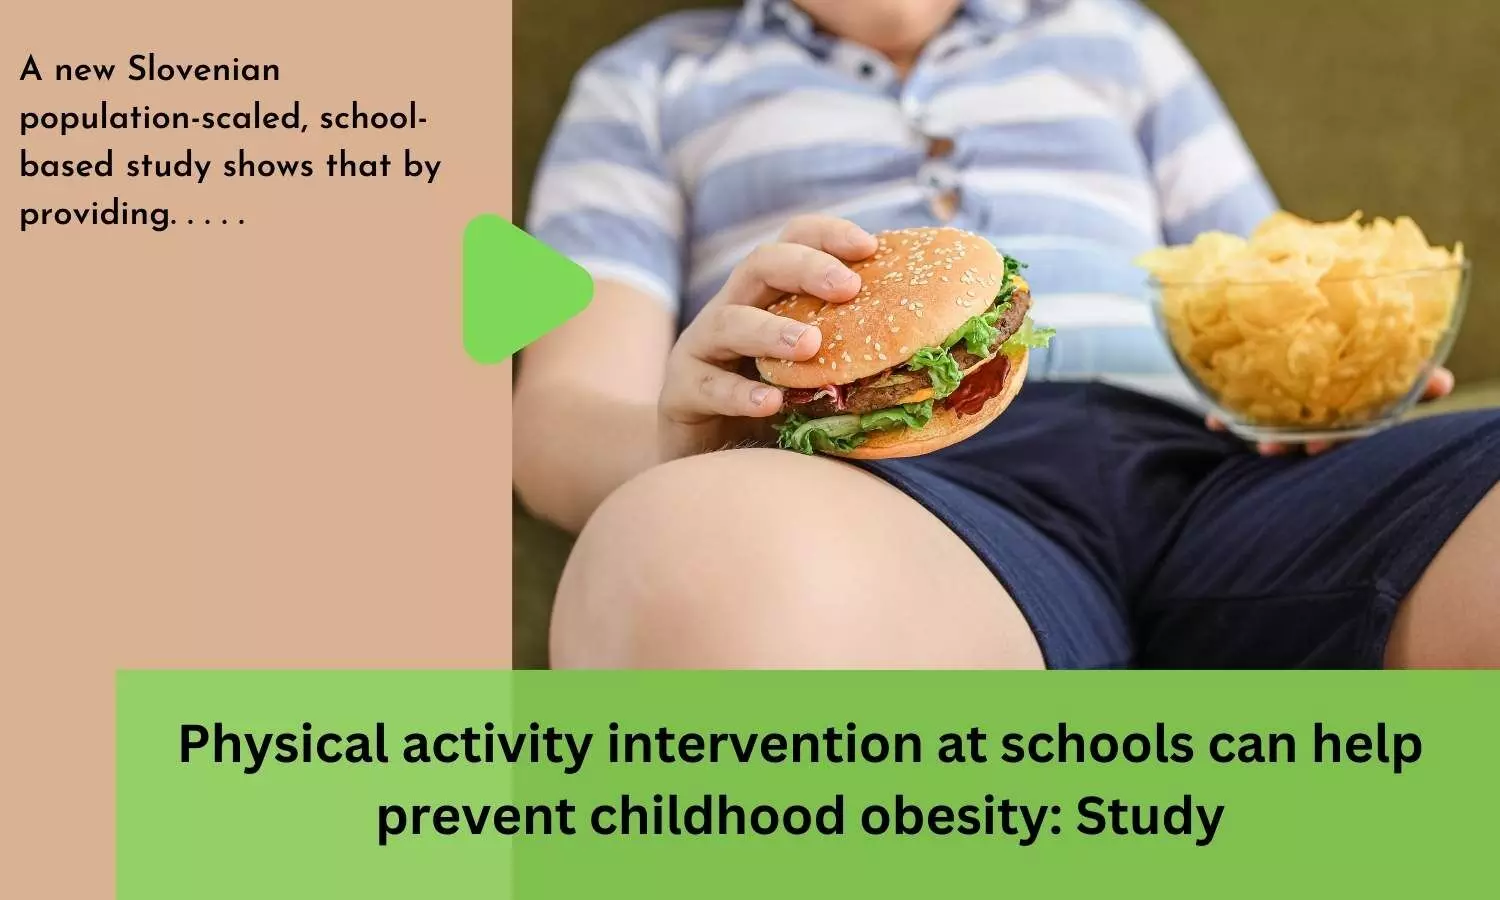 Physical activity intervention at schools can help prevent childhood obesity: Study